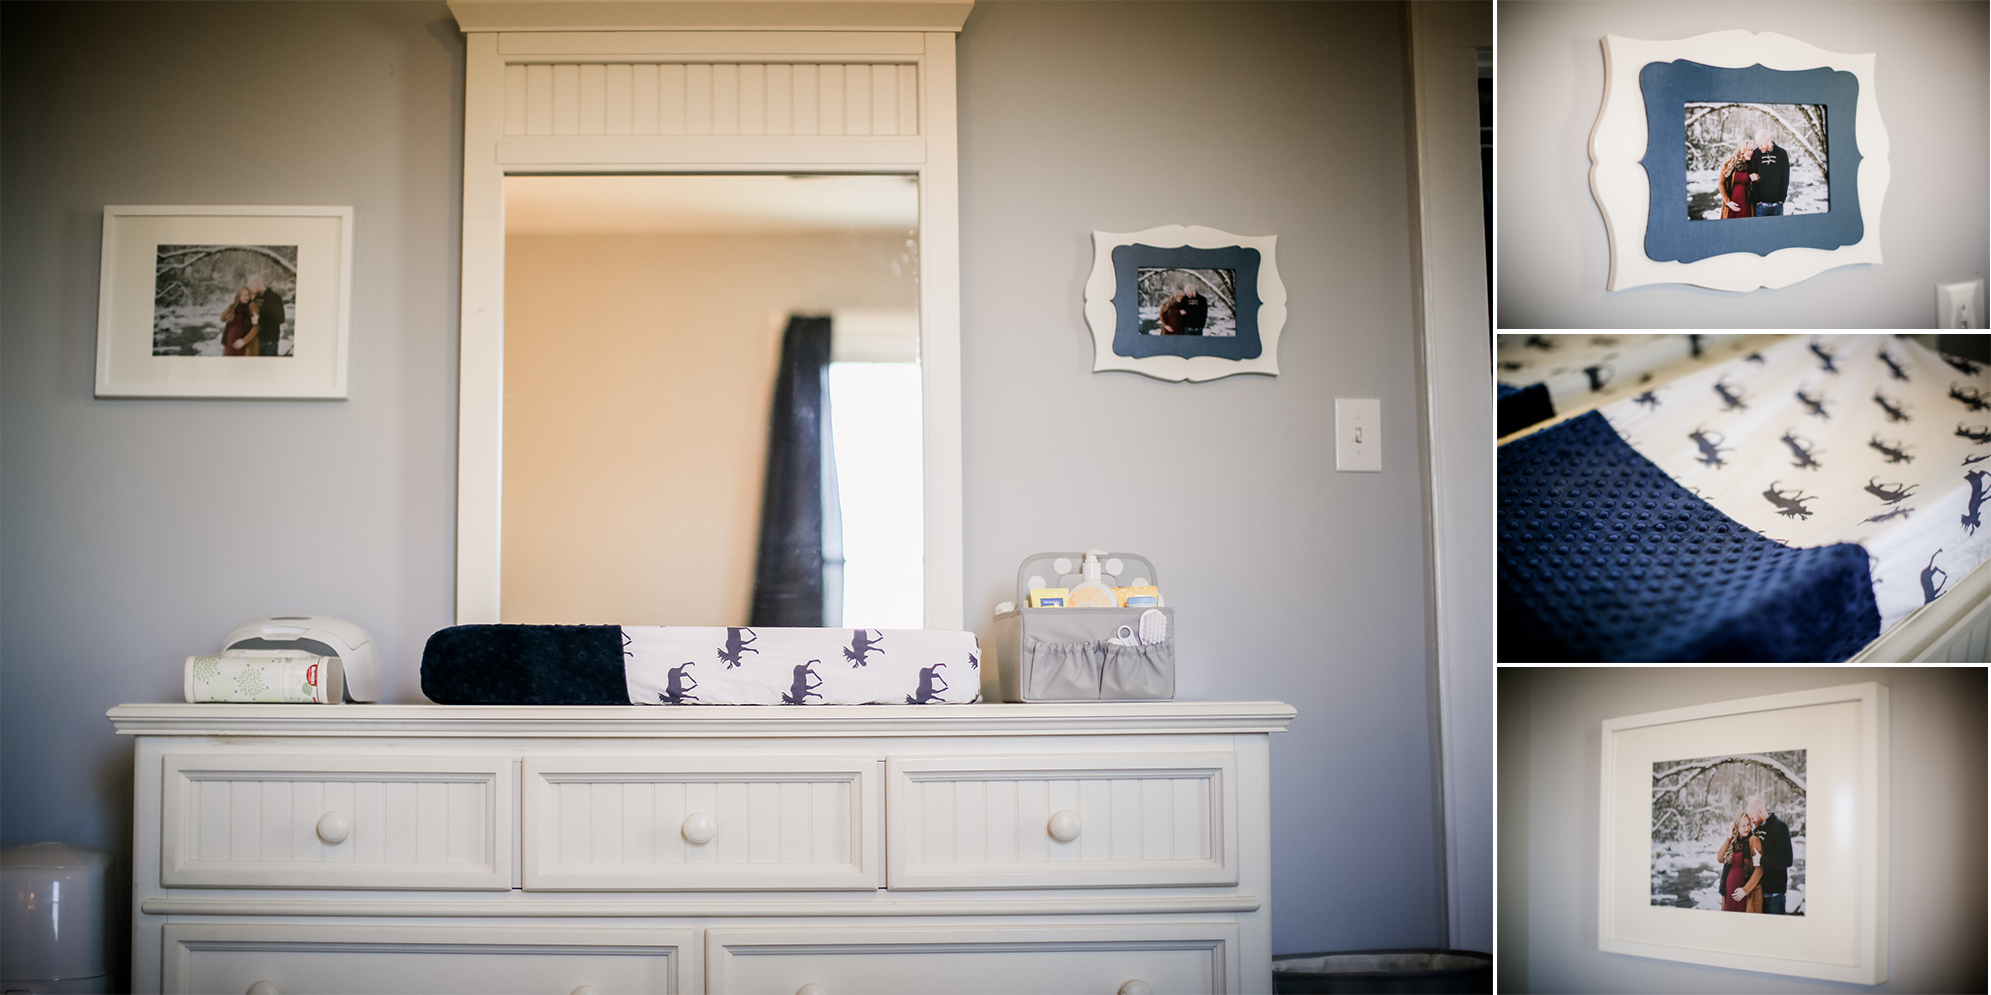 Changing table in the nursery by Knoxville Wedding Photographer, Amanda May Photos.